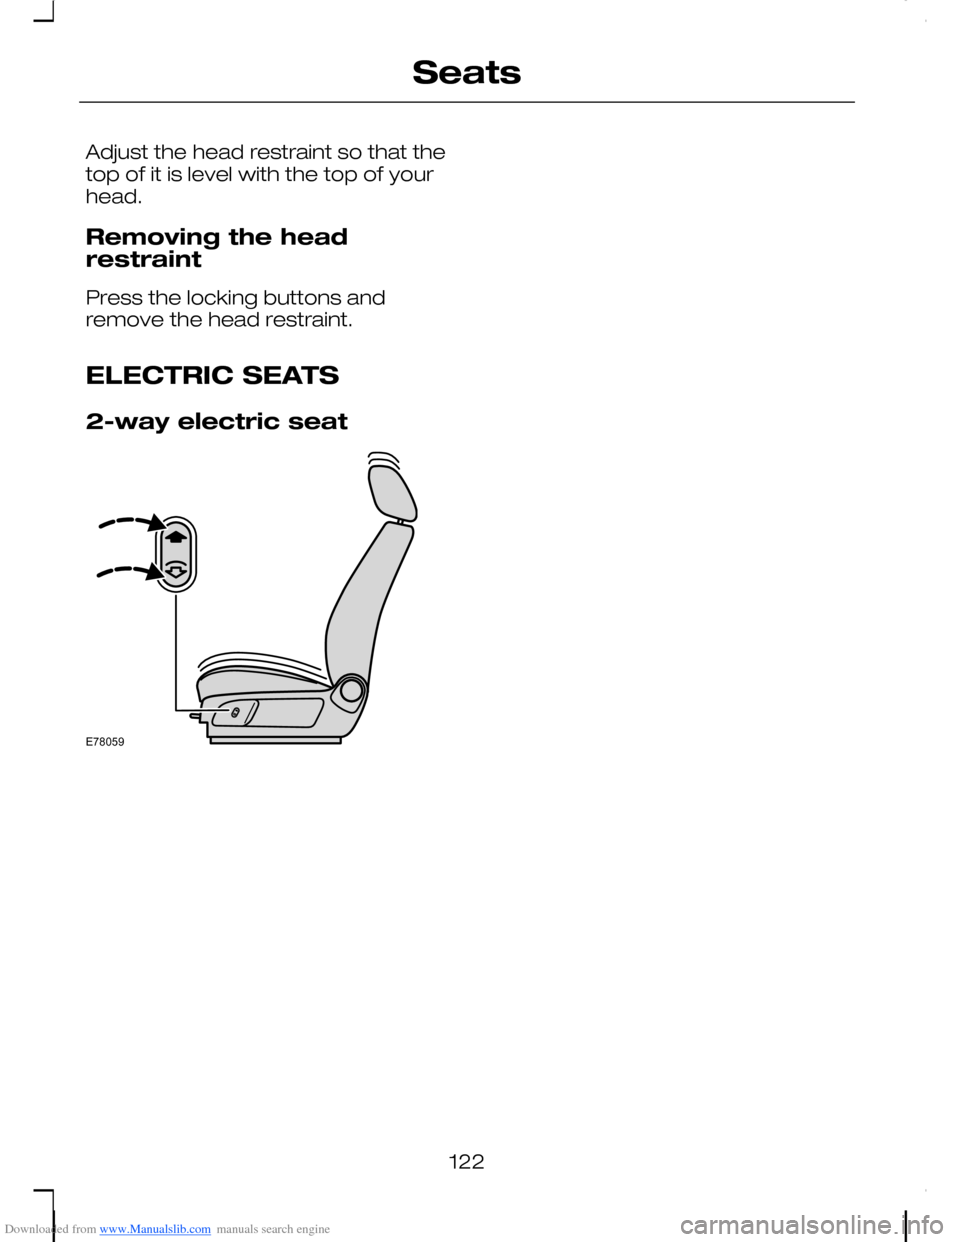 FORD C MAX 2008 1.G Owners Manual Downloaded from www.Manualslib.com manuals search engine Adjust the head restraint so that thetop of it is level with the top of yourhead.
Removing the headrestraint
Press the locking buttons andremov